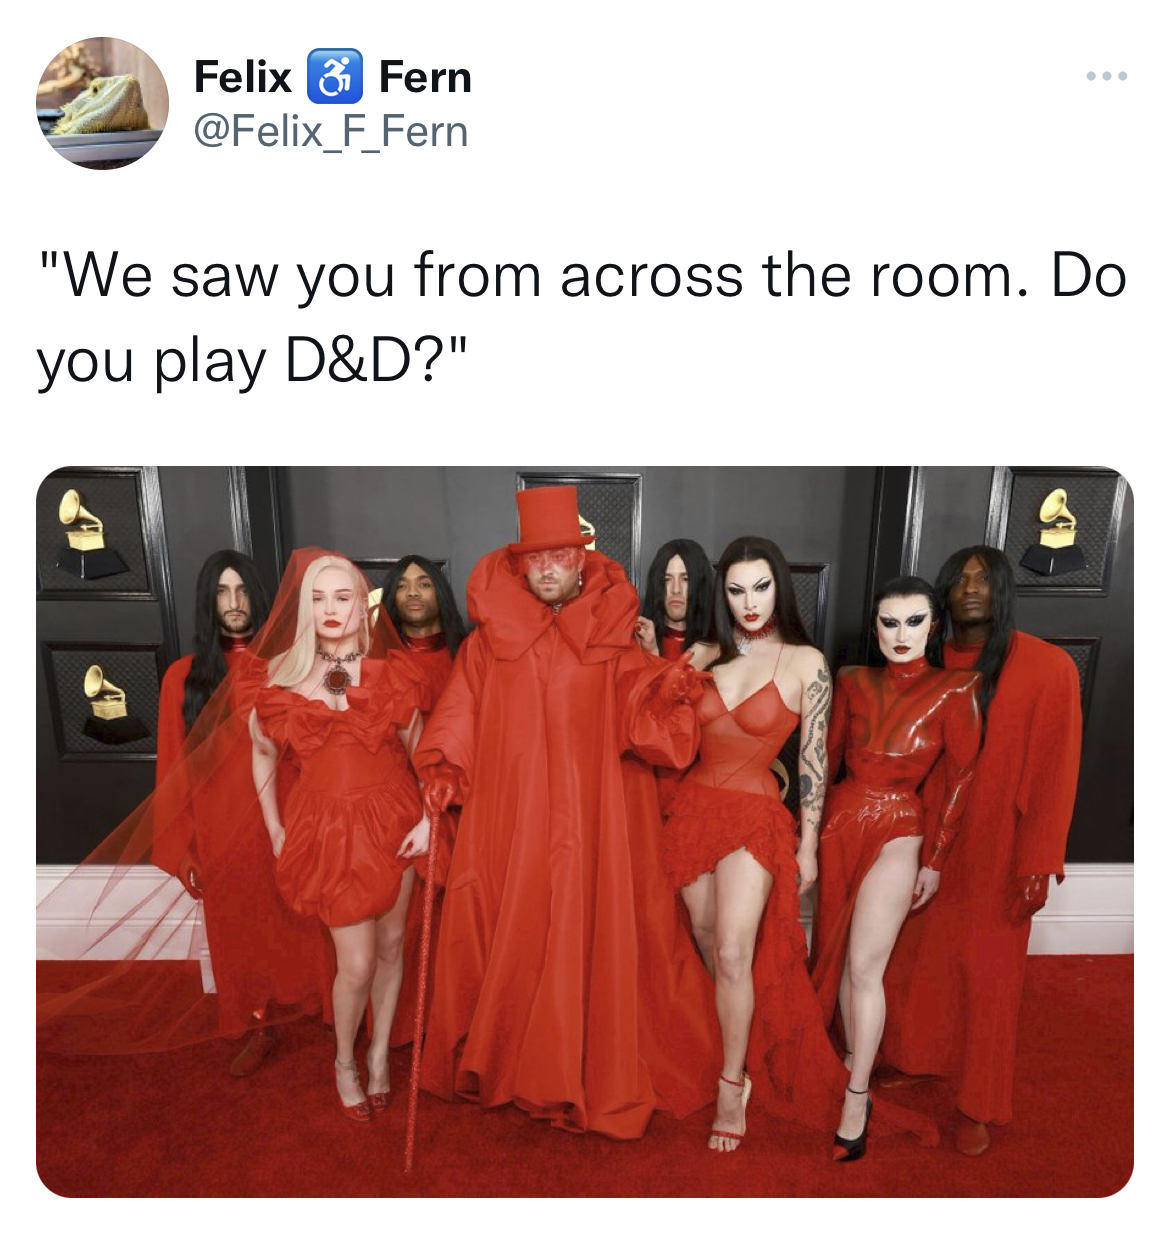 swinger memes across the bar - 65th Annual Grammy Award - Felix & Fern "We saw you from across the room. Do you play D&D?"